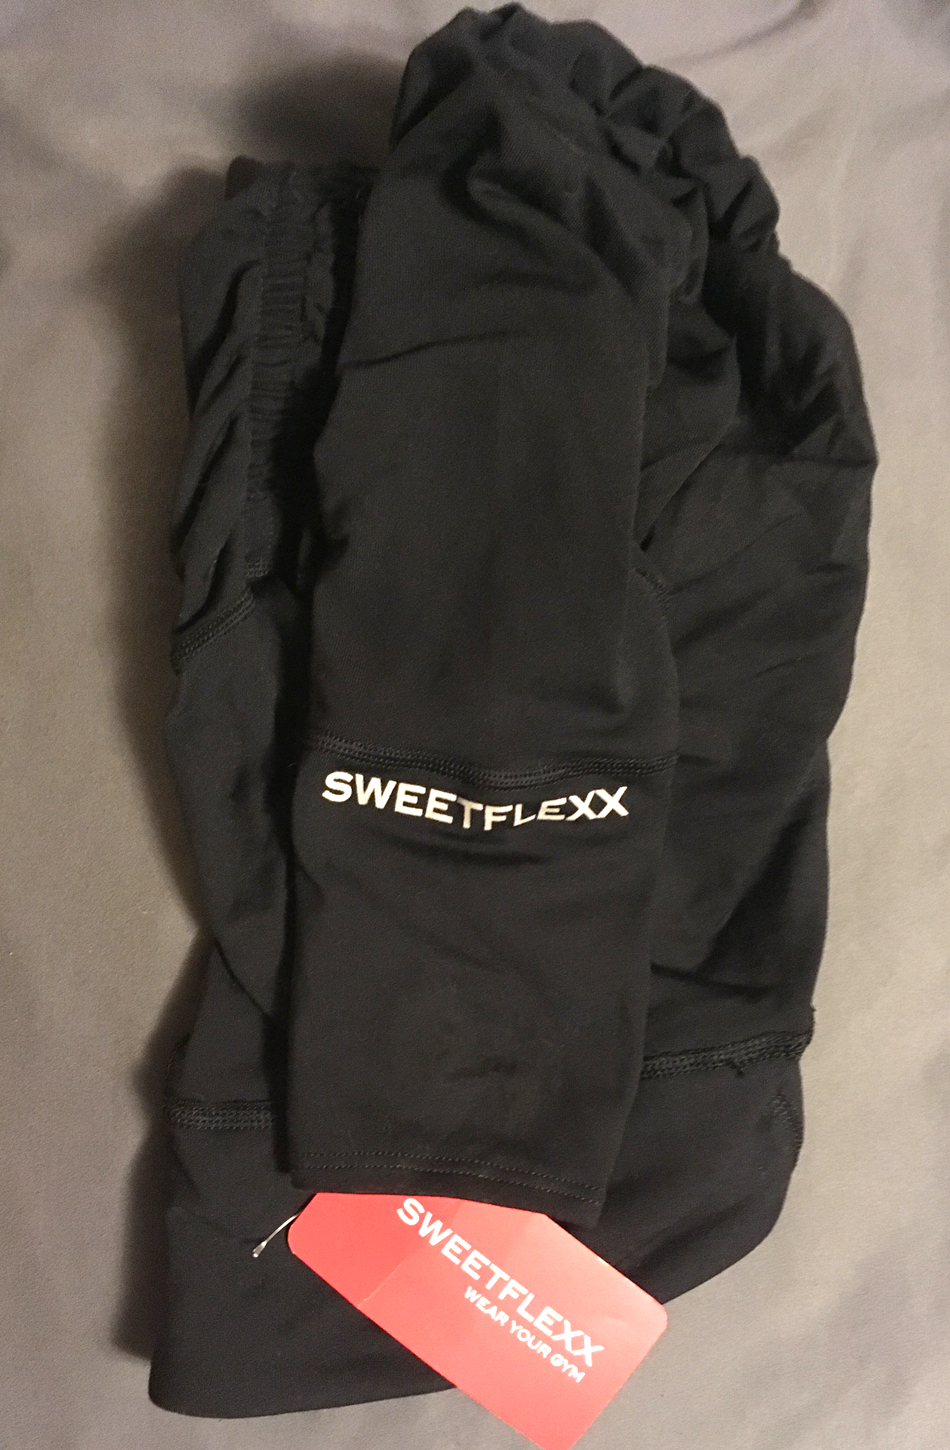 sweetflexx, Pants & Jumpsuits, Womens Sweetflexx Leggings With Resistance  Bands Built In Black Size 4 Hi Rise